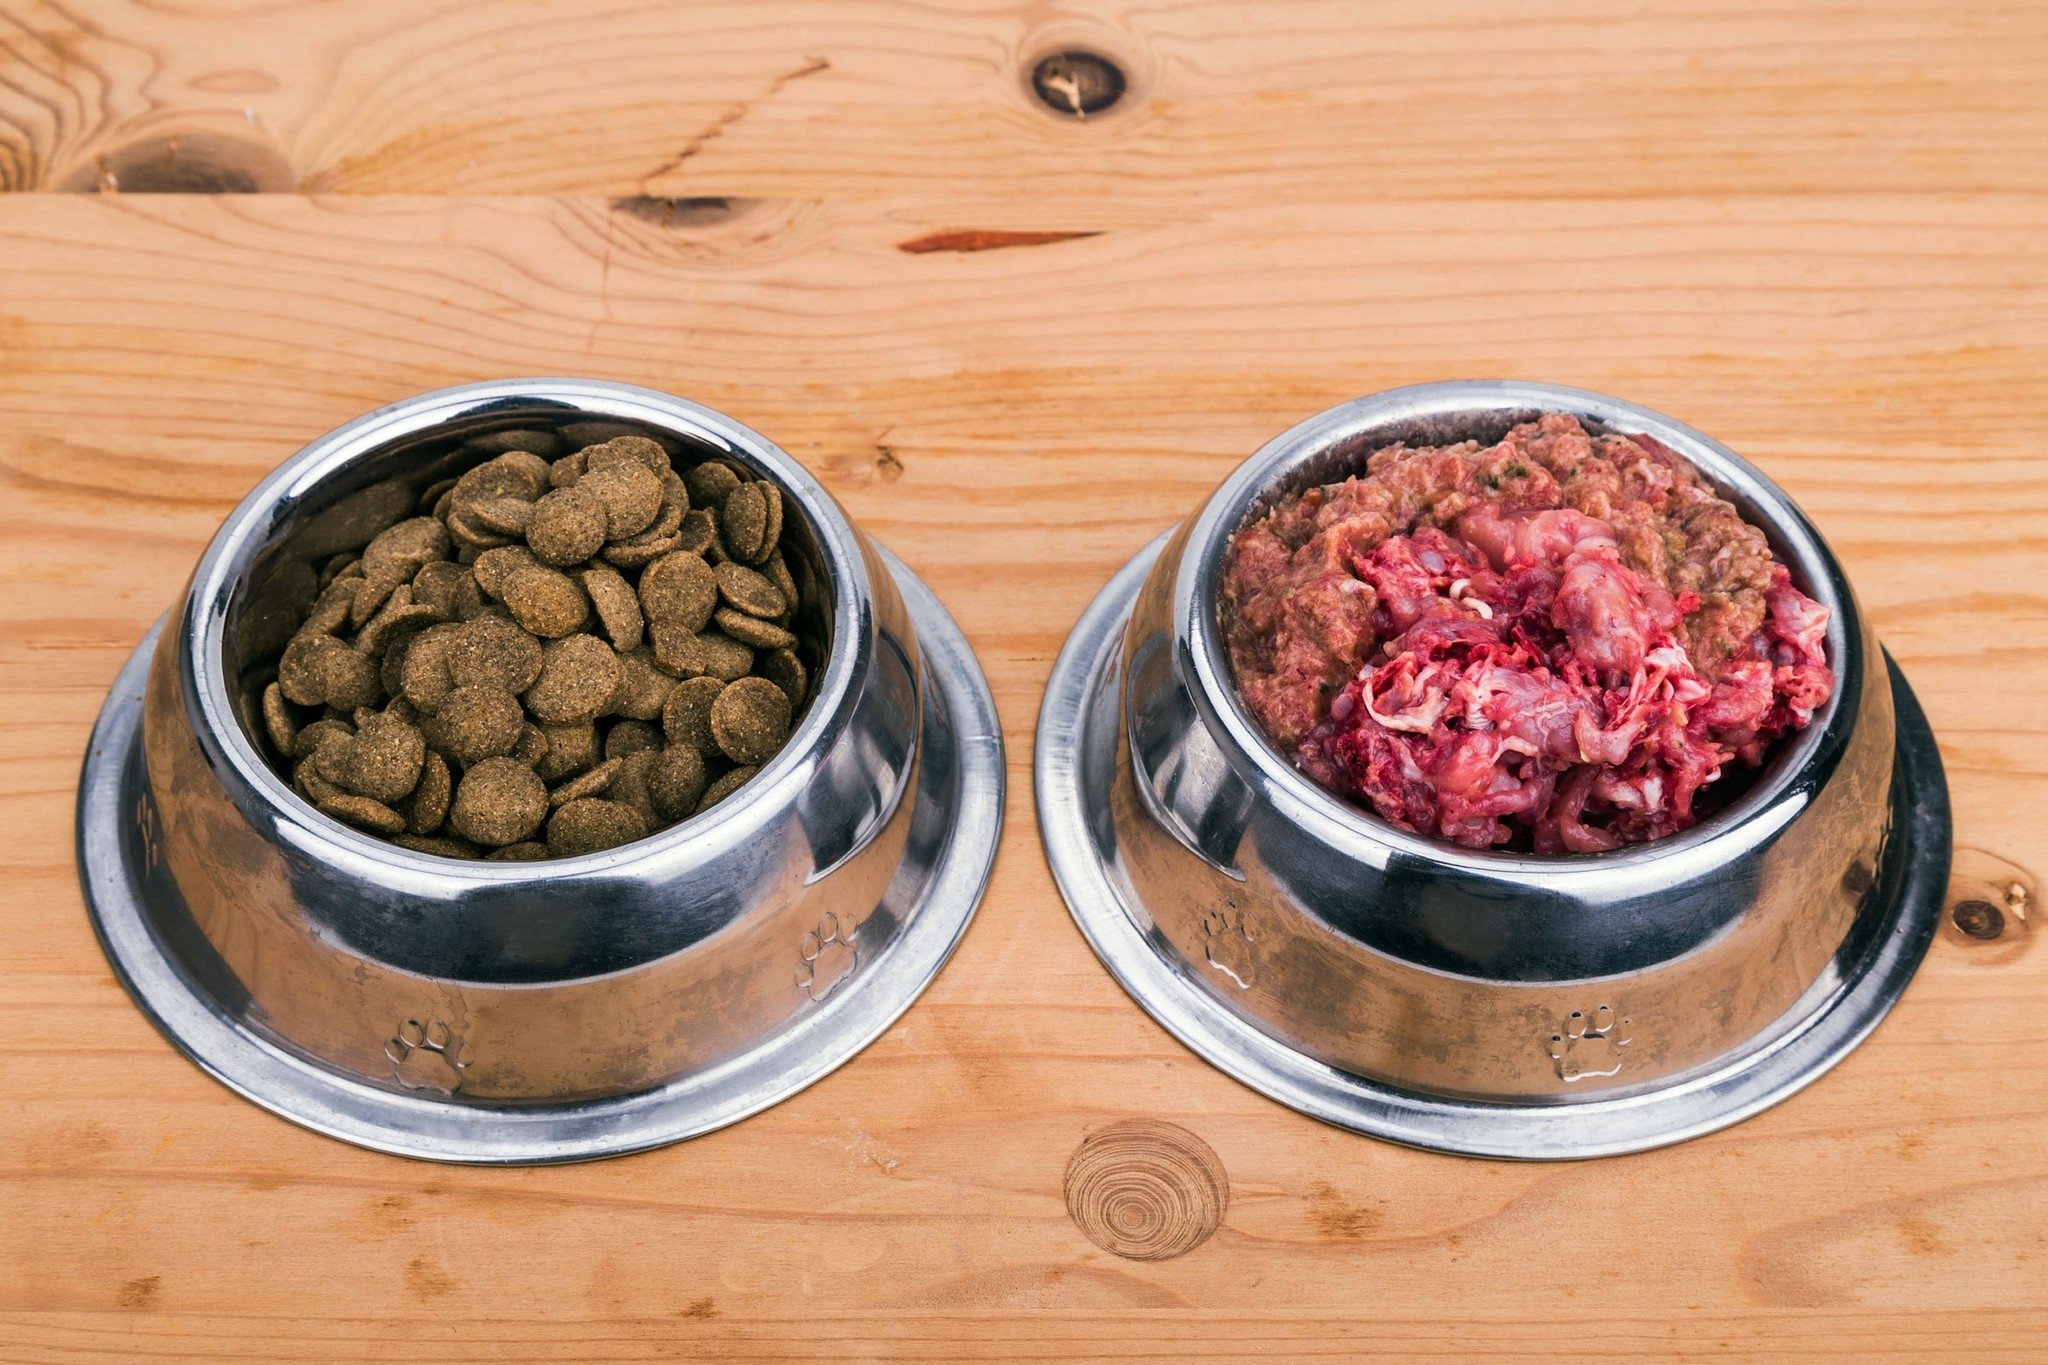 Case Study: My Experience with Raw Feeding. How Small Changes Can Help Your Cat or Dog Feel Healthier.